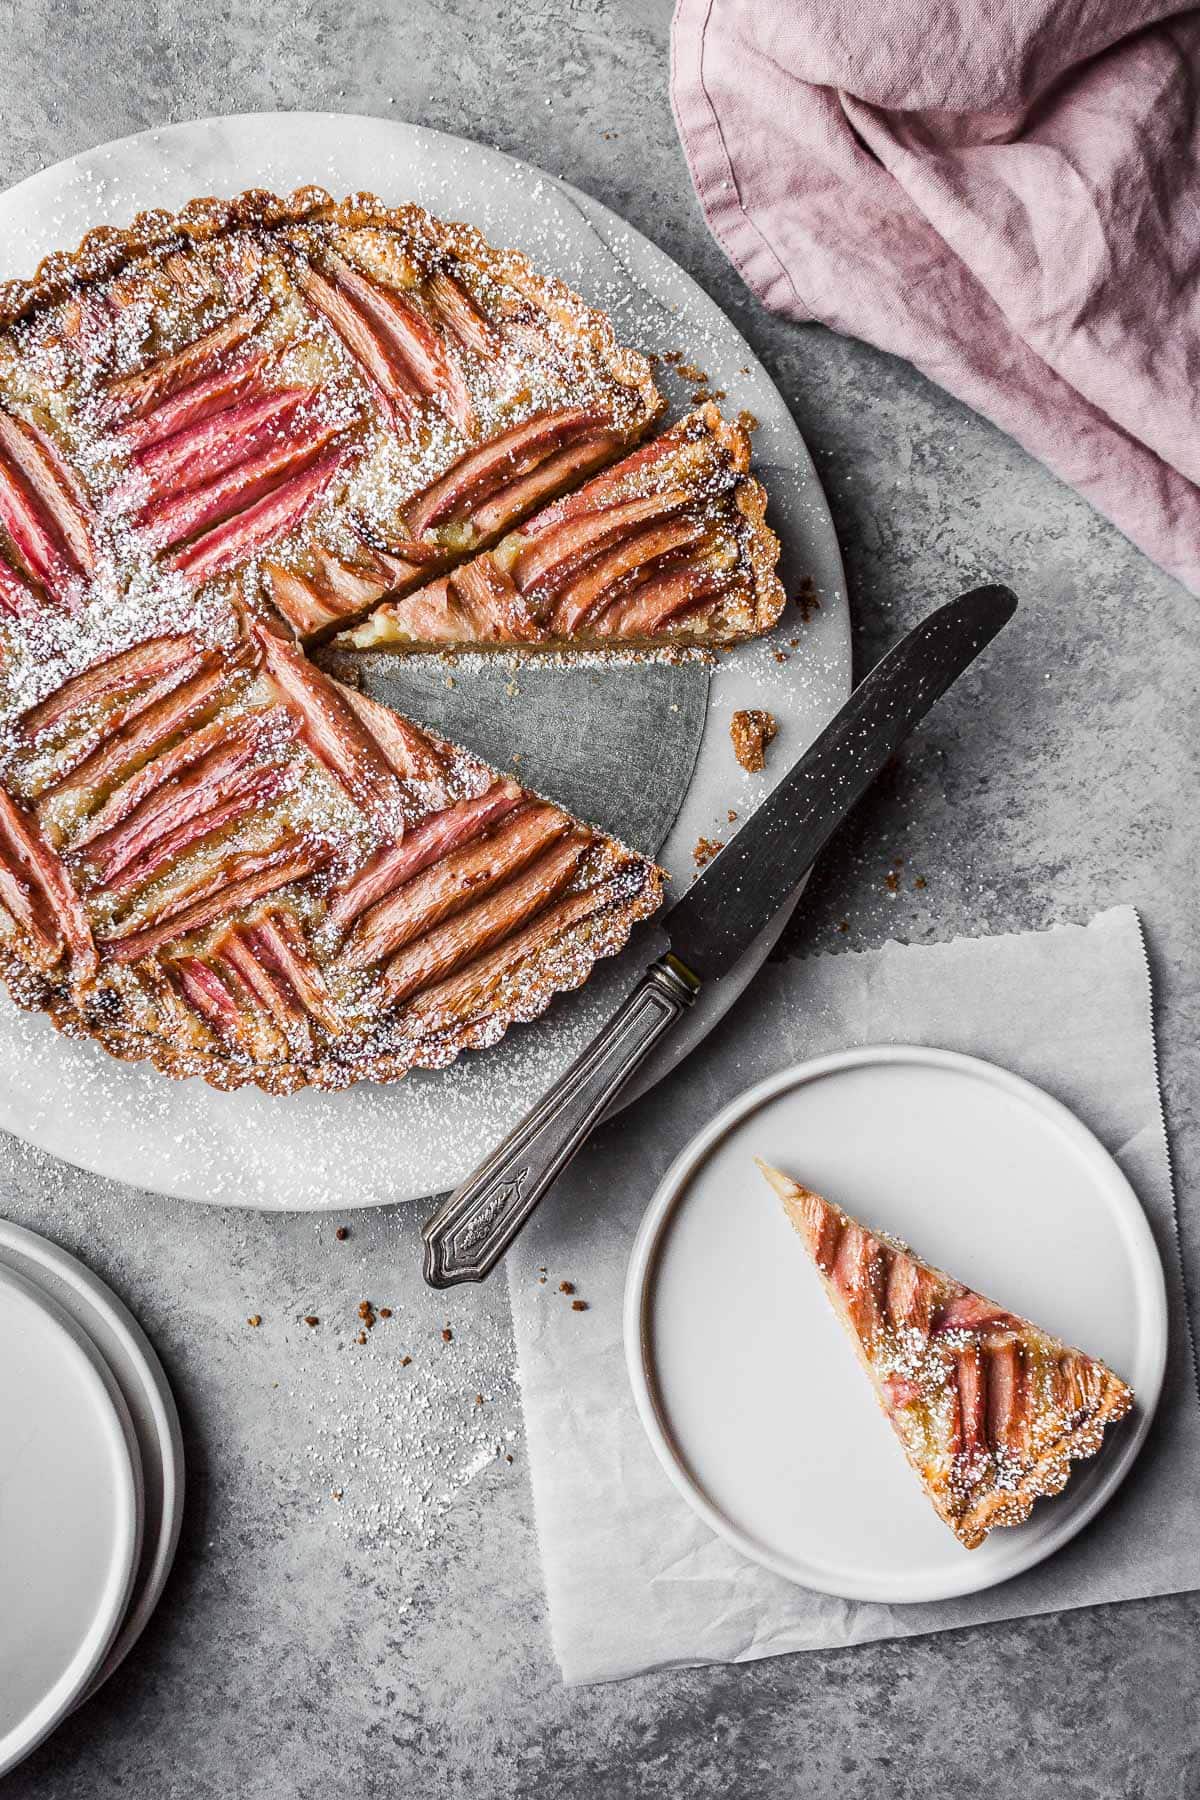 Rhubarb tart with a slice on a white plate nearby.